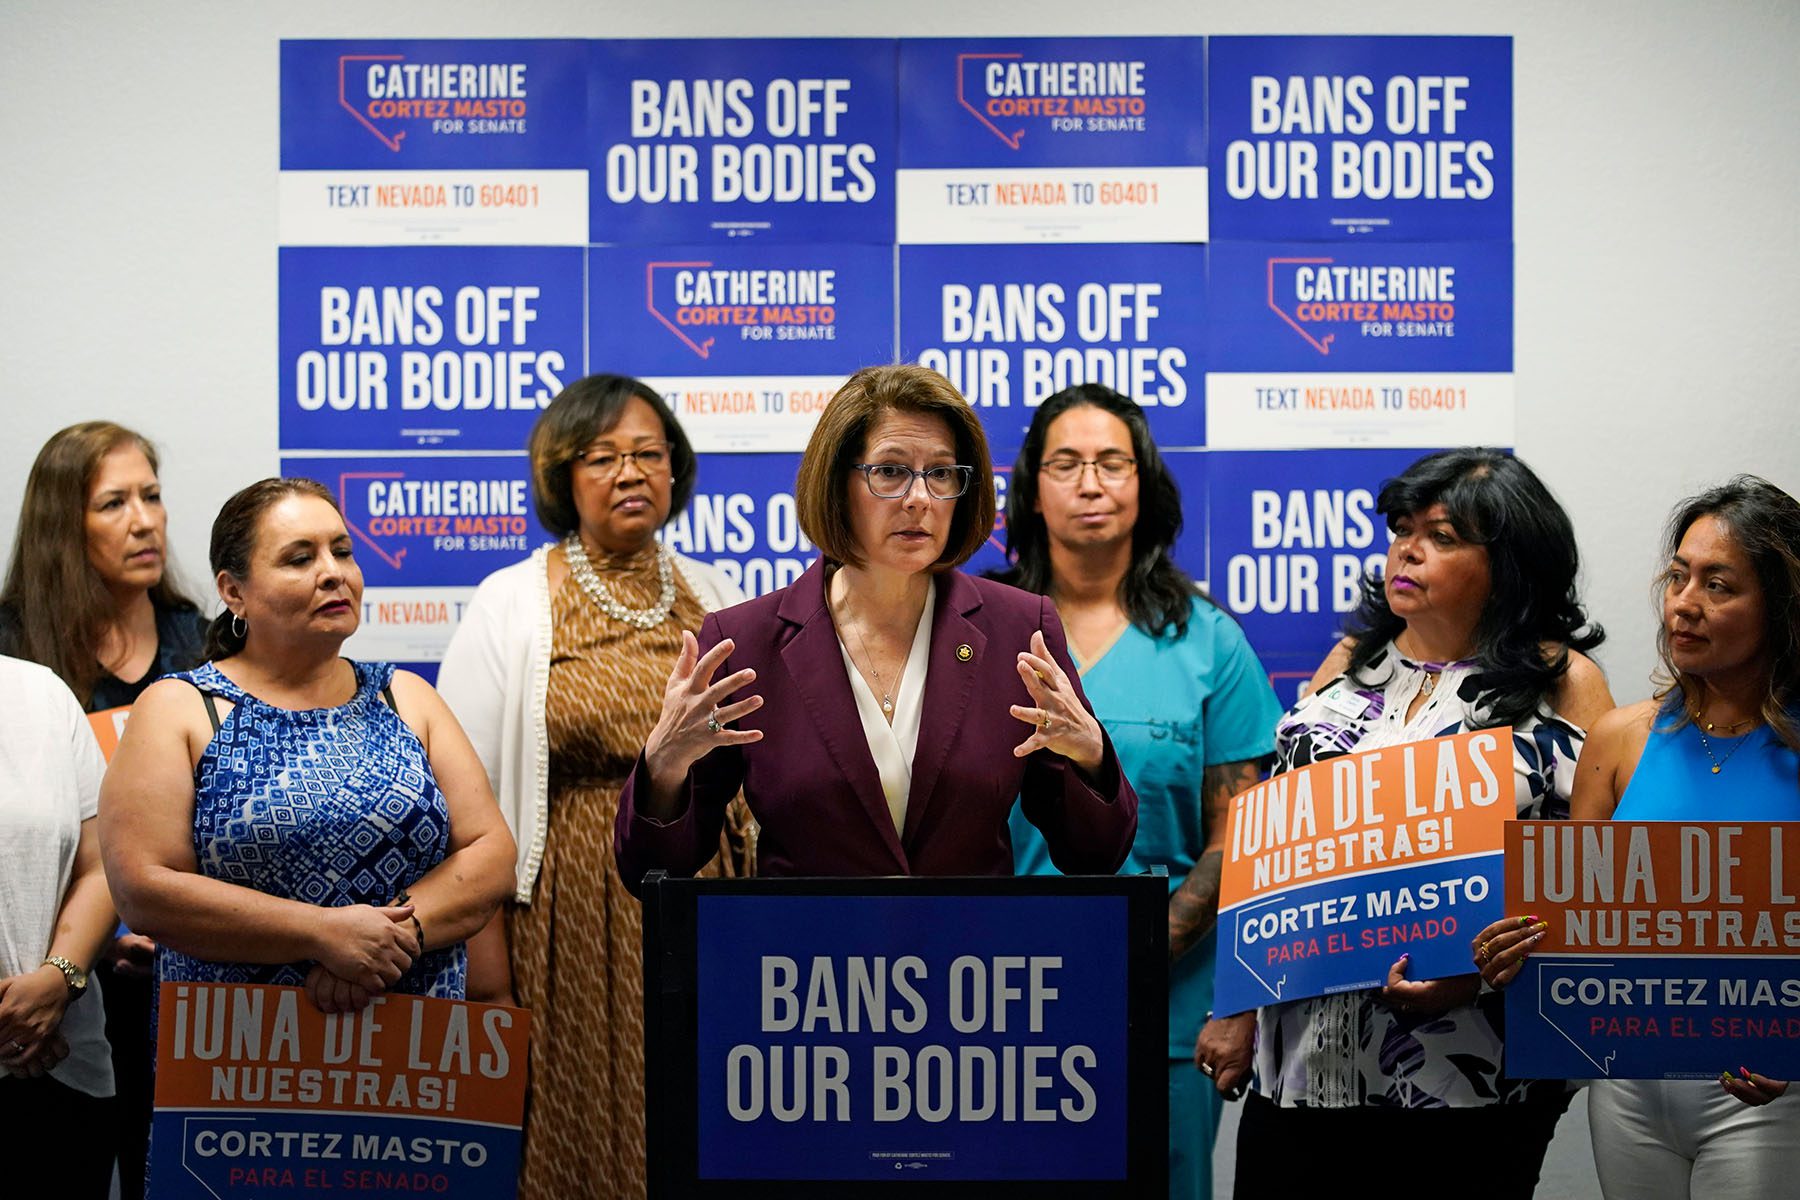 Sen. Catherine Cortez Masto stands behind a podium surrounded by women holding "Bans Off Our Bodies" signs.